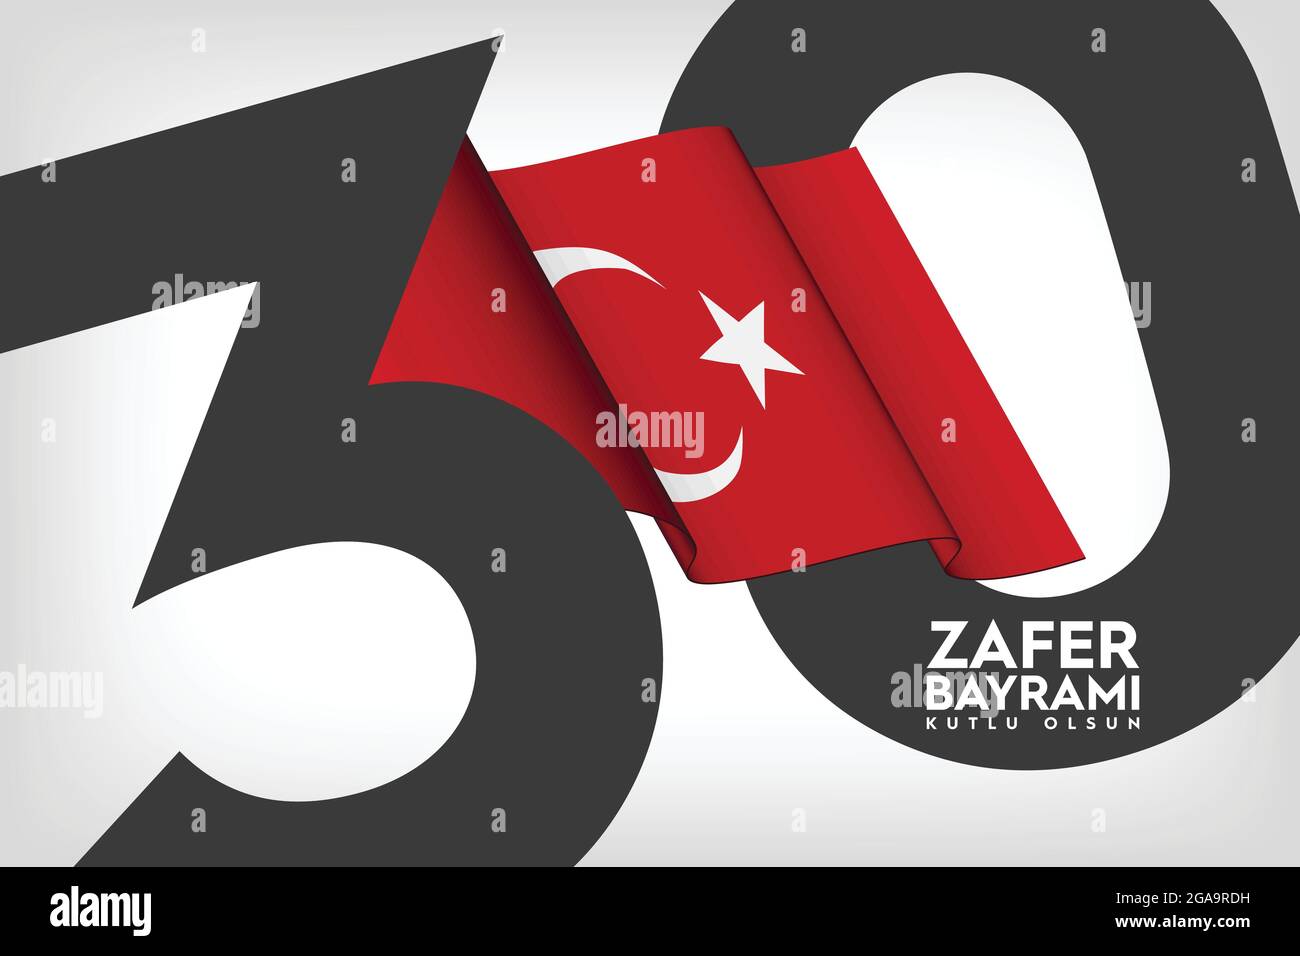 August 30 Victory Day Celebration Banner Design, Republic of Turkey. Republic of Turkey August 30 Victory Day. Stock Vector